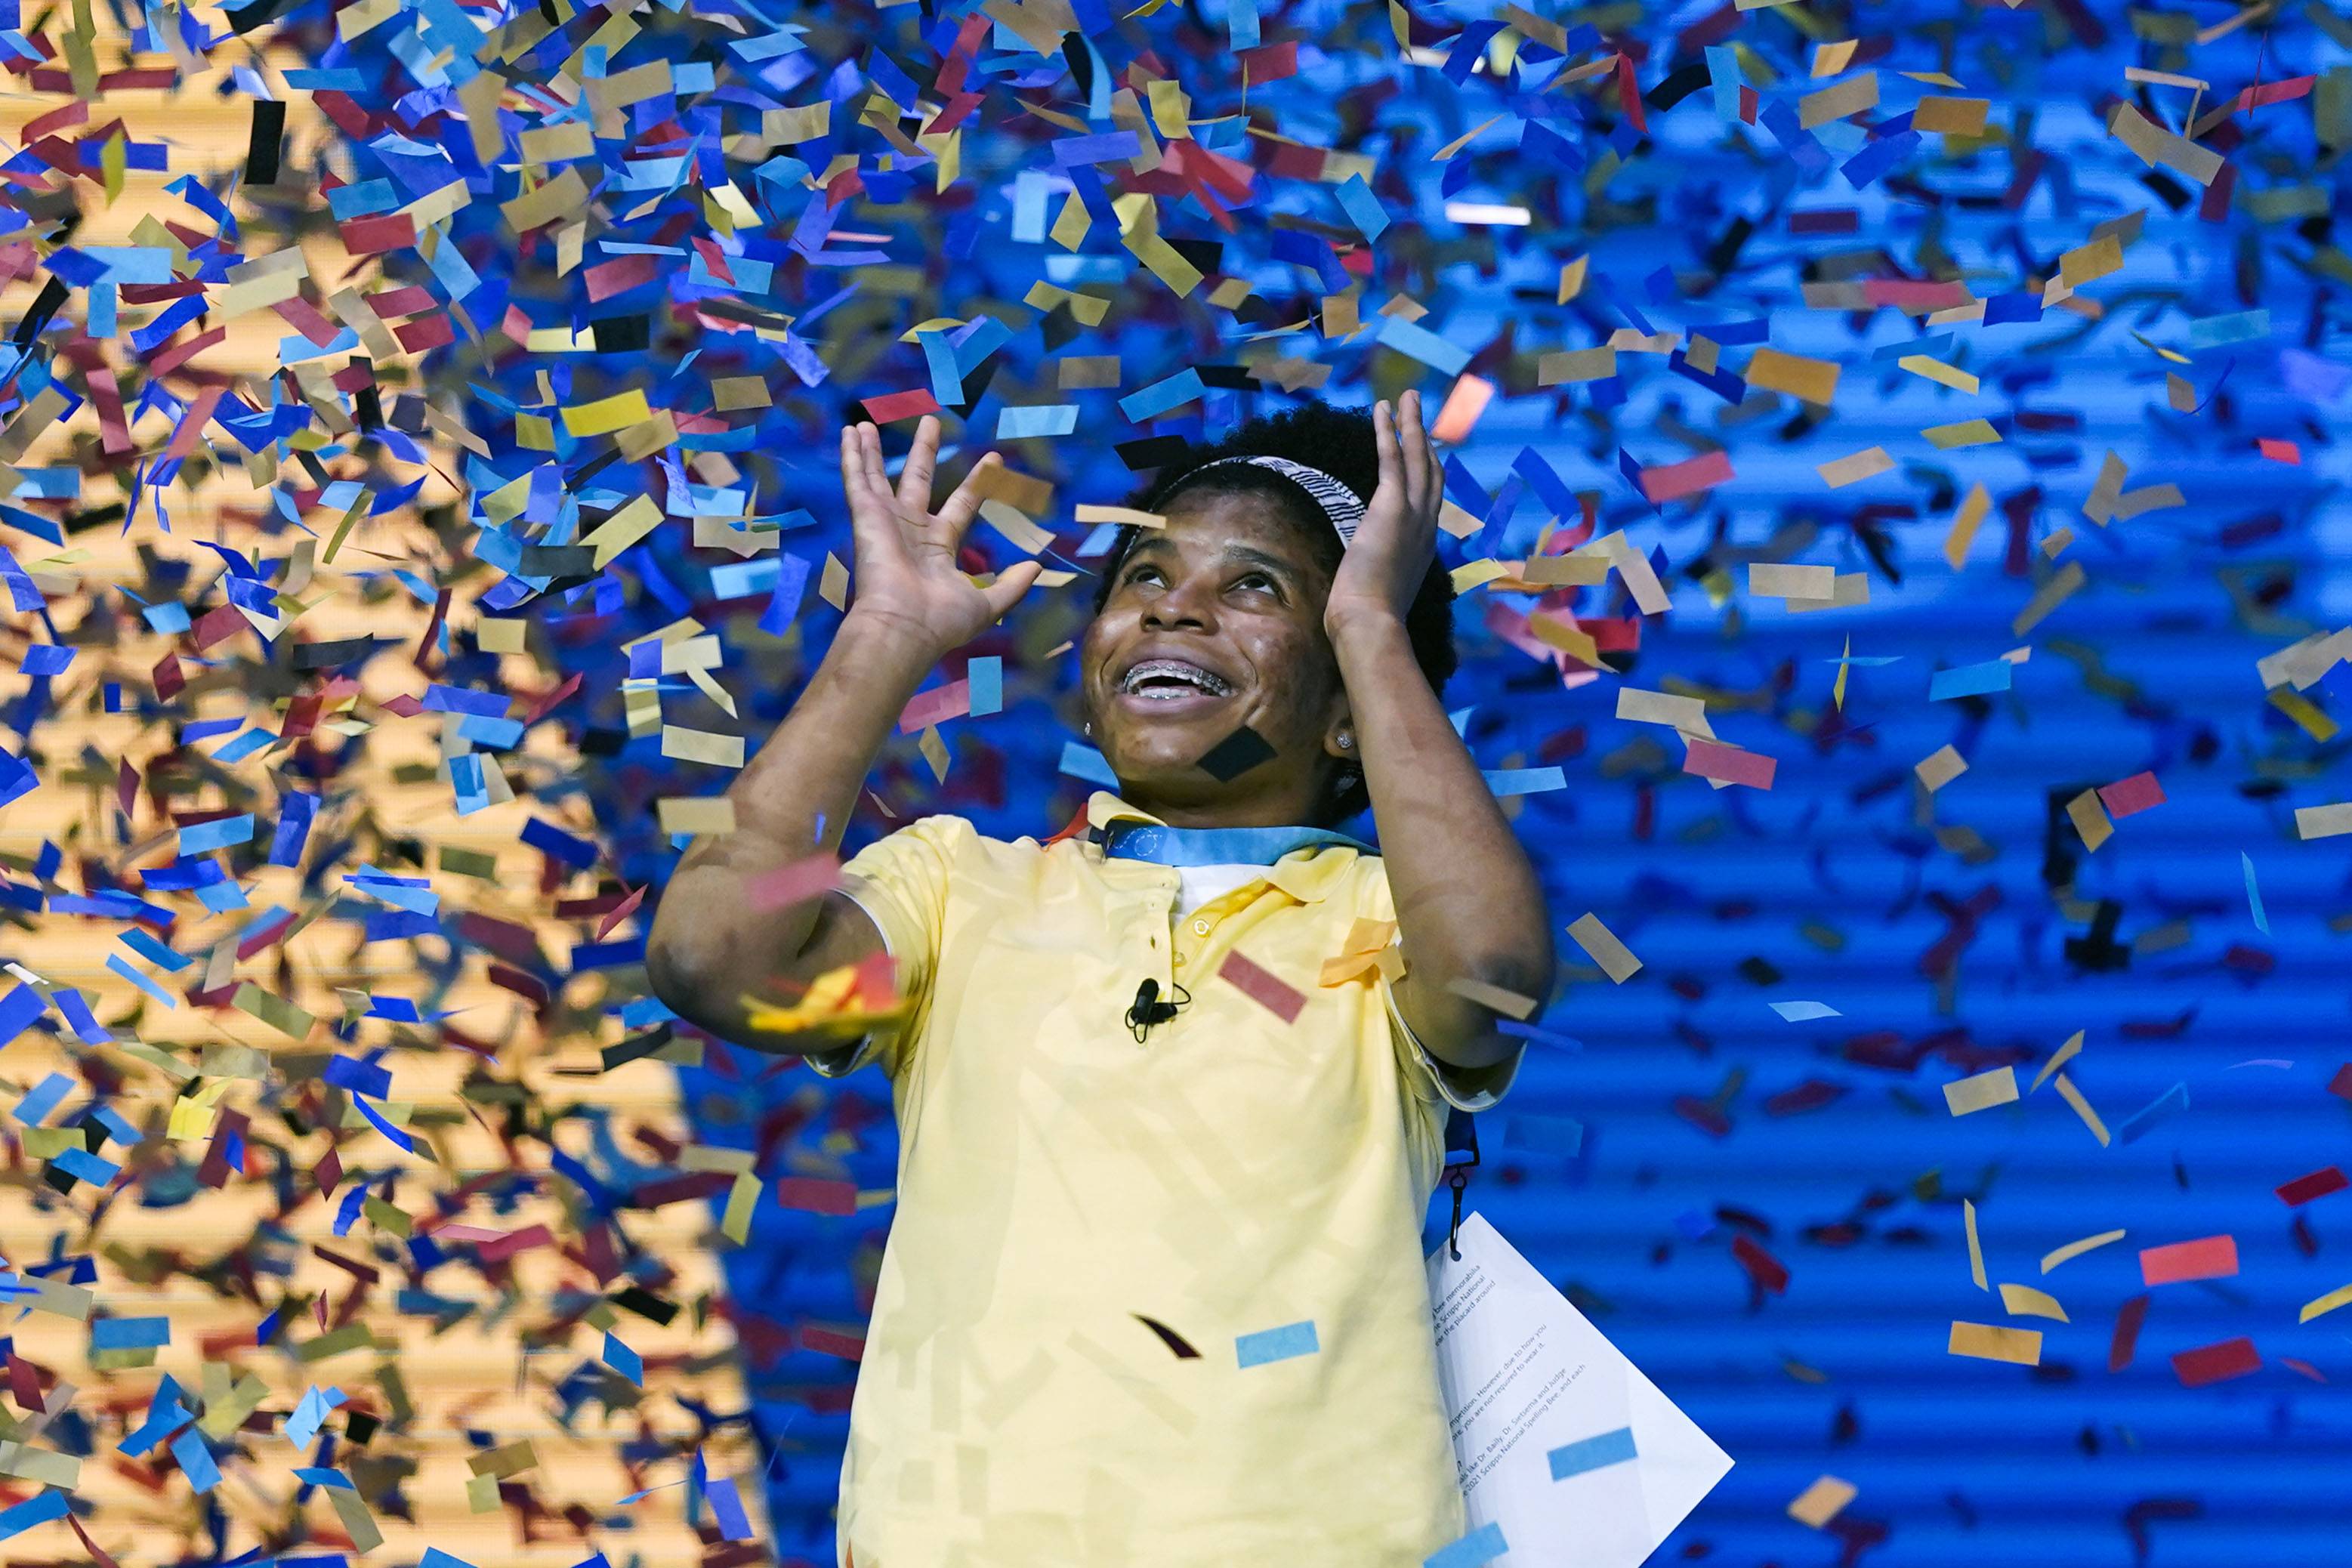 Zaila Avant-garde, 14, from Harvey, Louisiana is covered with confetti as she celebrates winning the finals of the 2021 Scripps National Spelling Bee at Disney World Thursday, July 8, 2021, in Lake Buena Vista, Fla. (AP Photo/John Raoux)